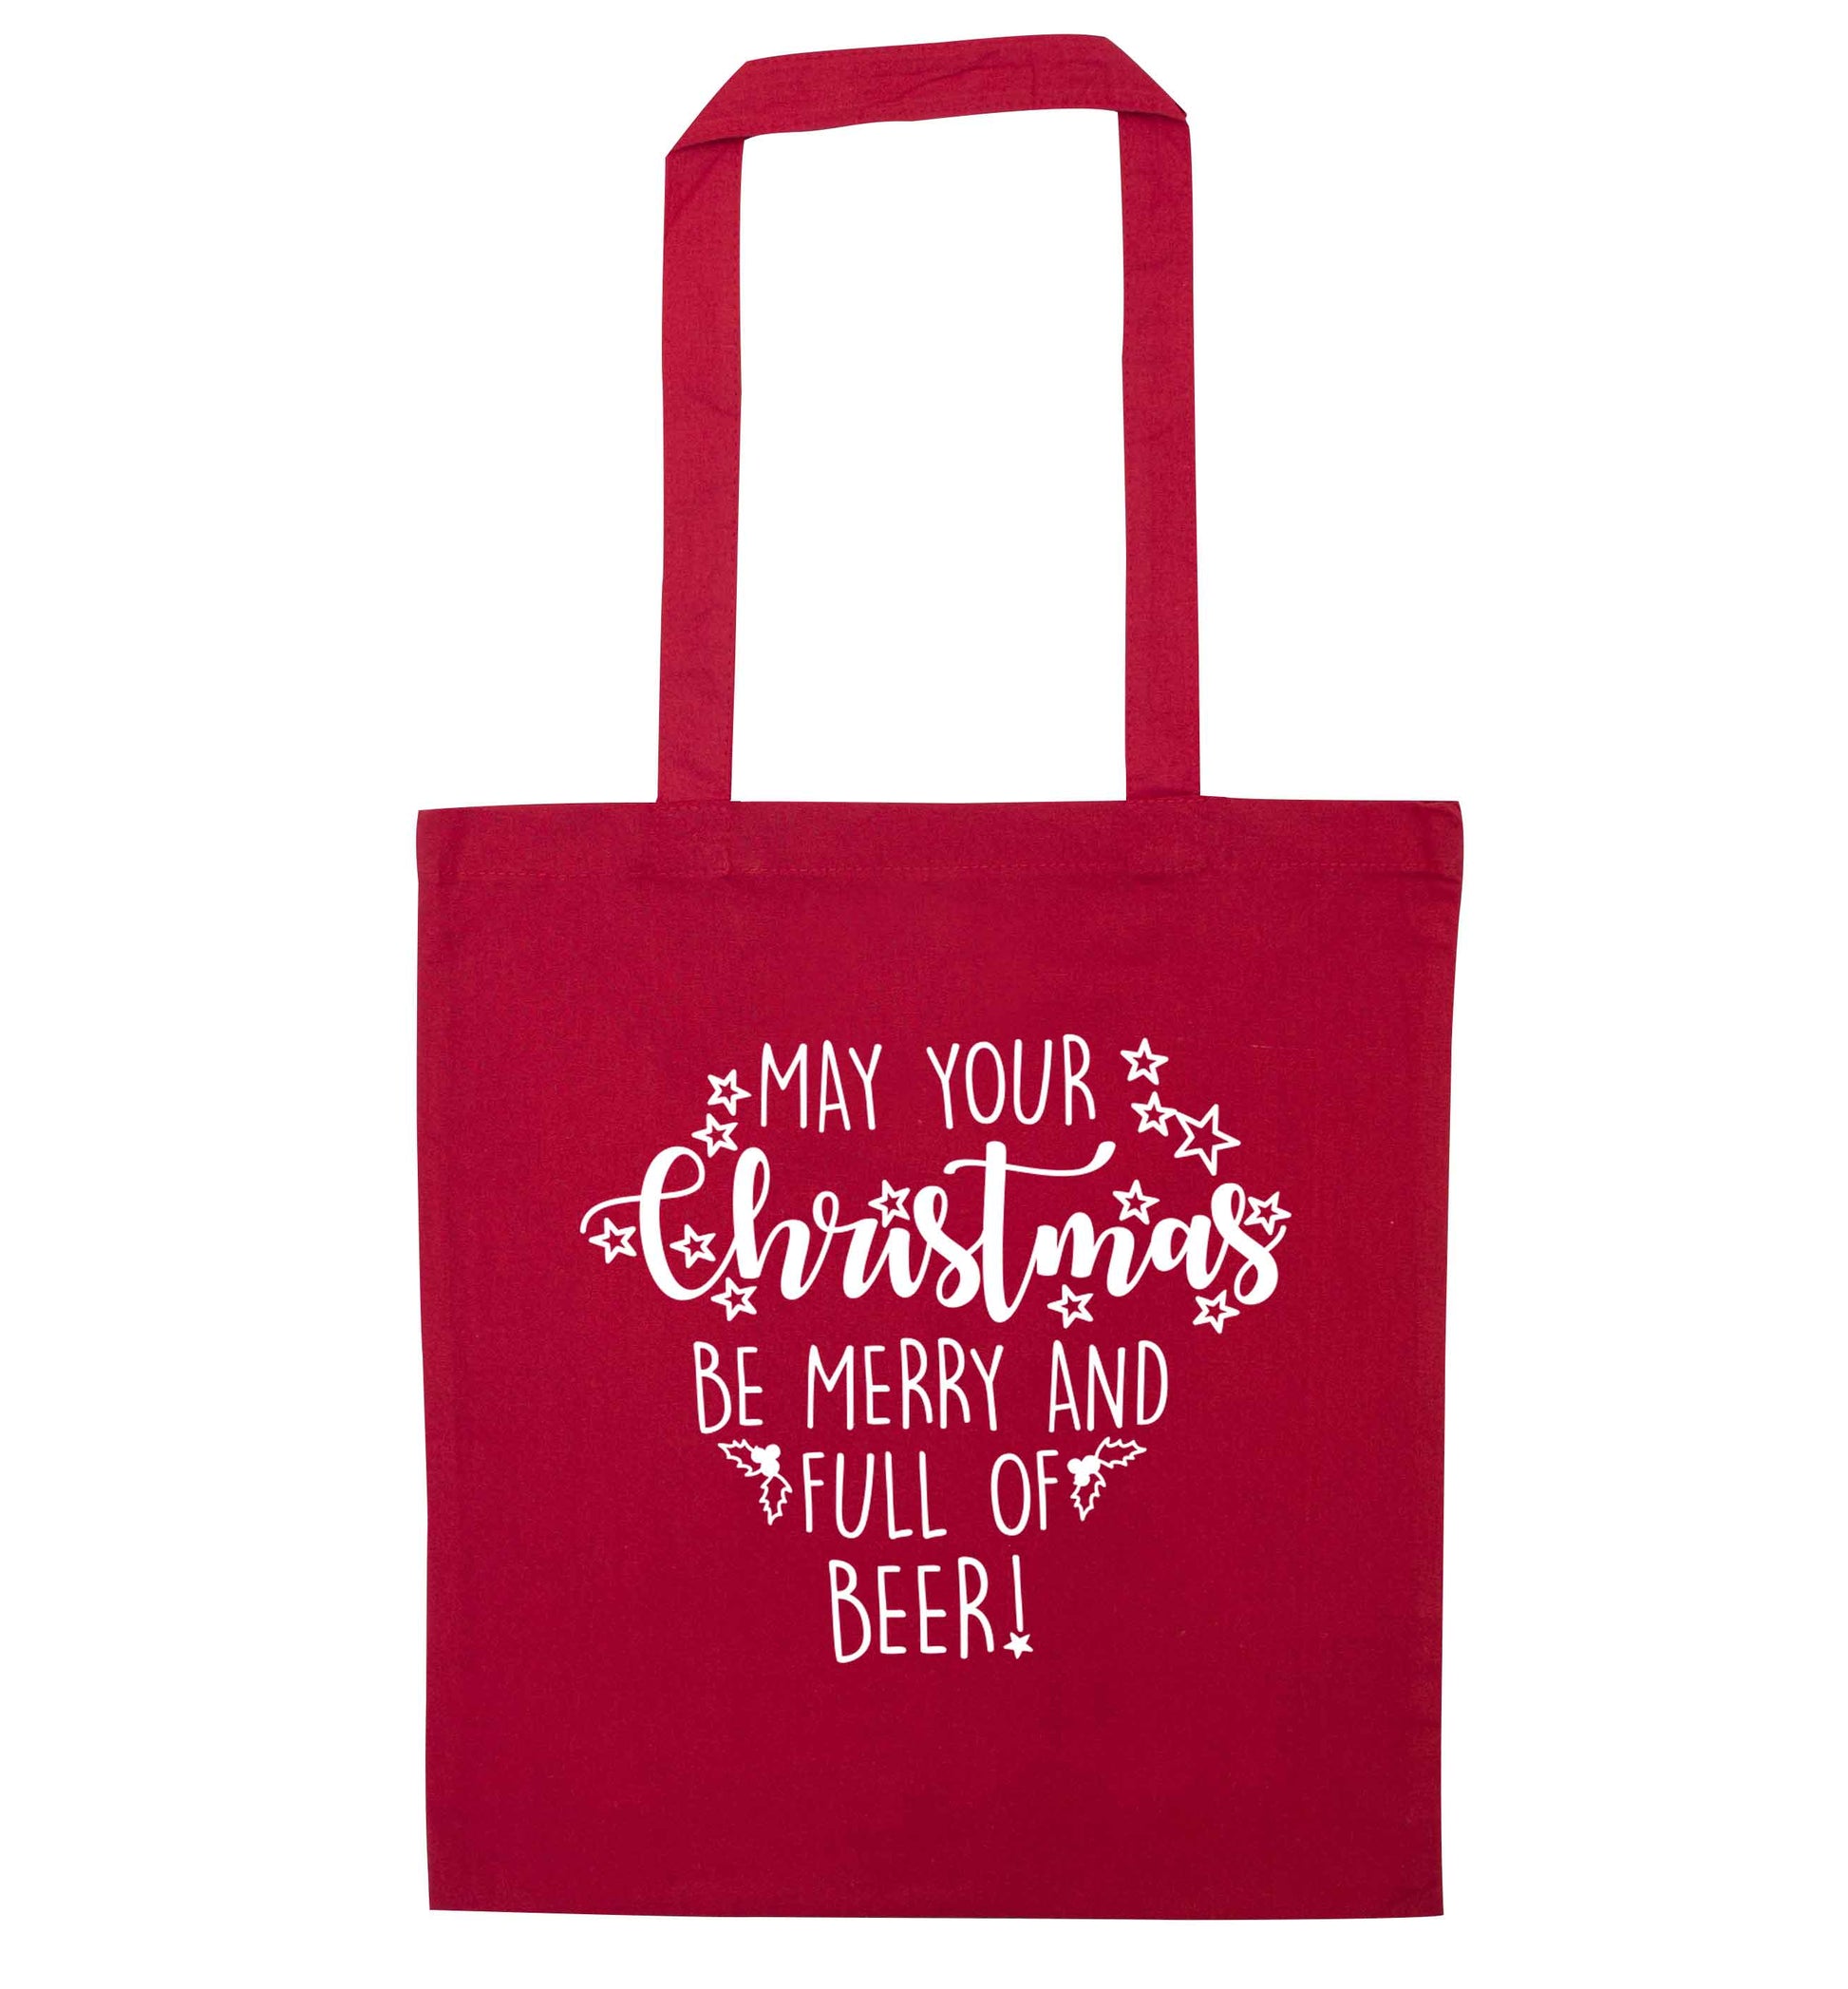 May your Christmas be merry and full of beer red tote bag